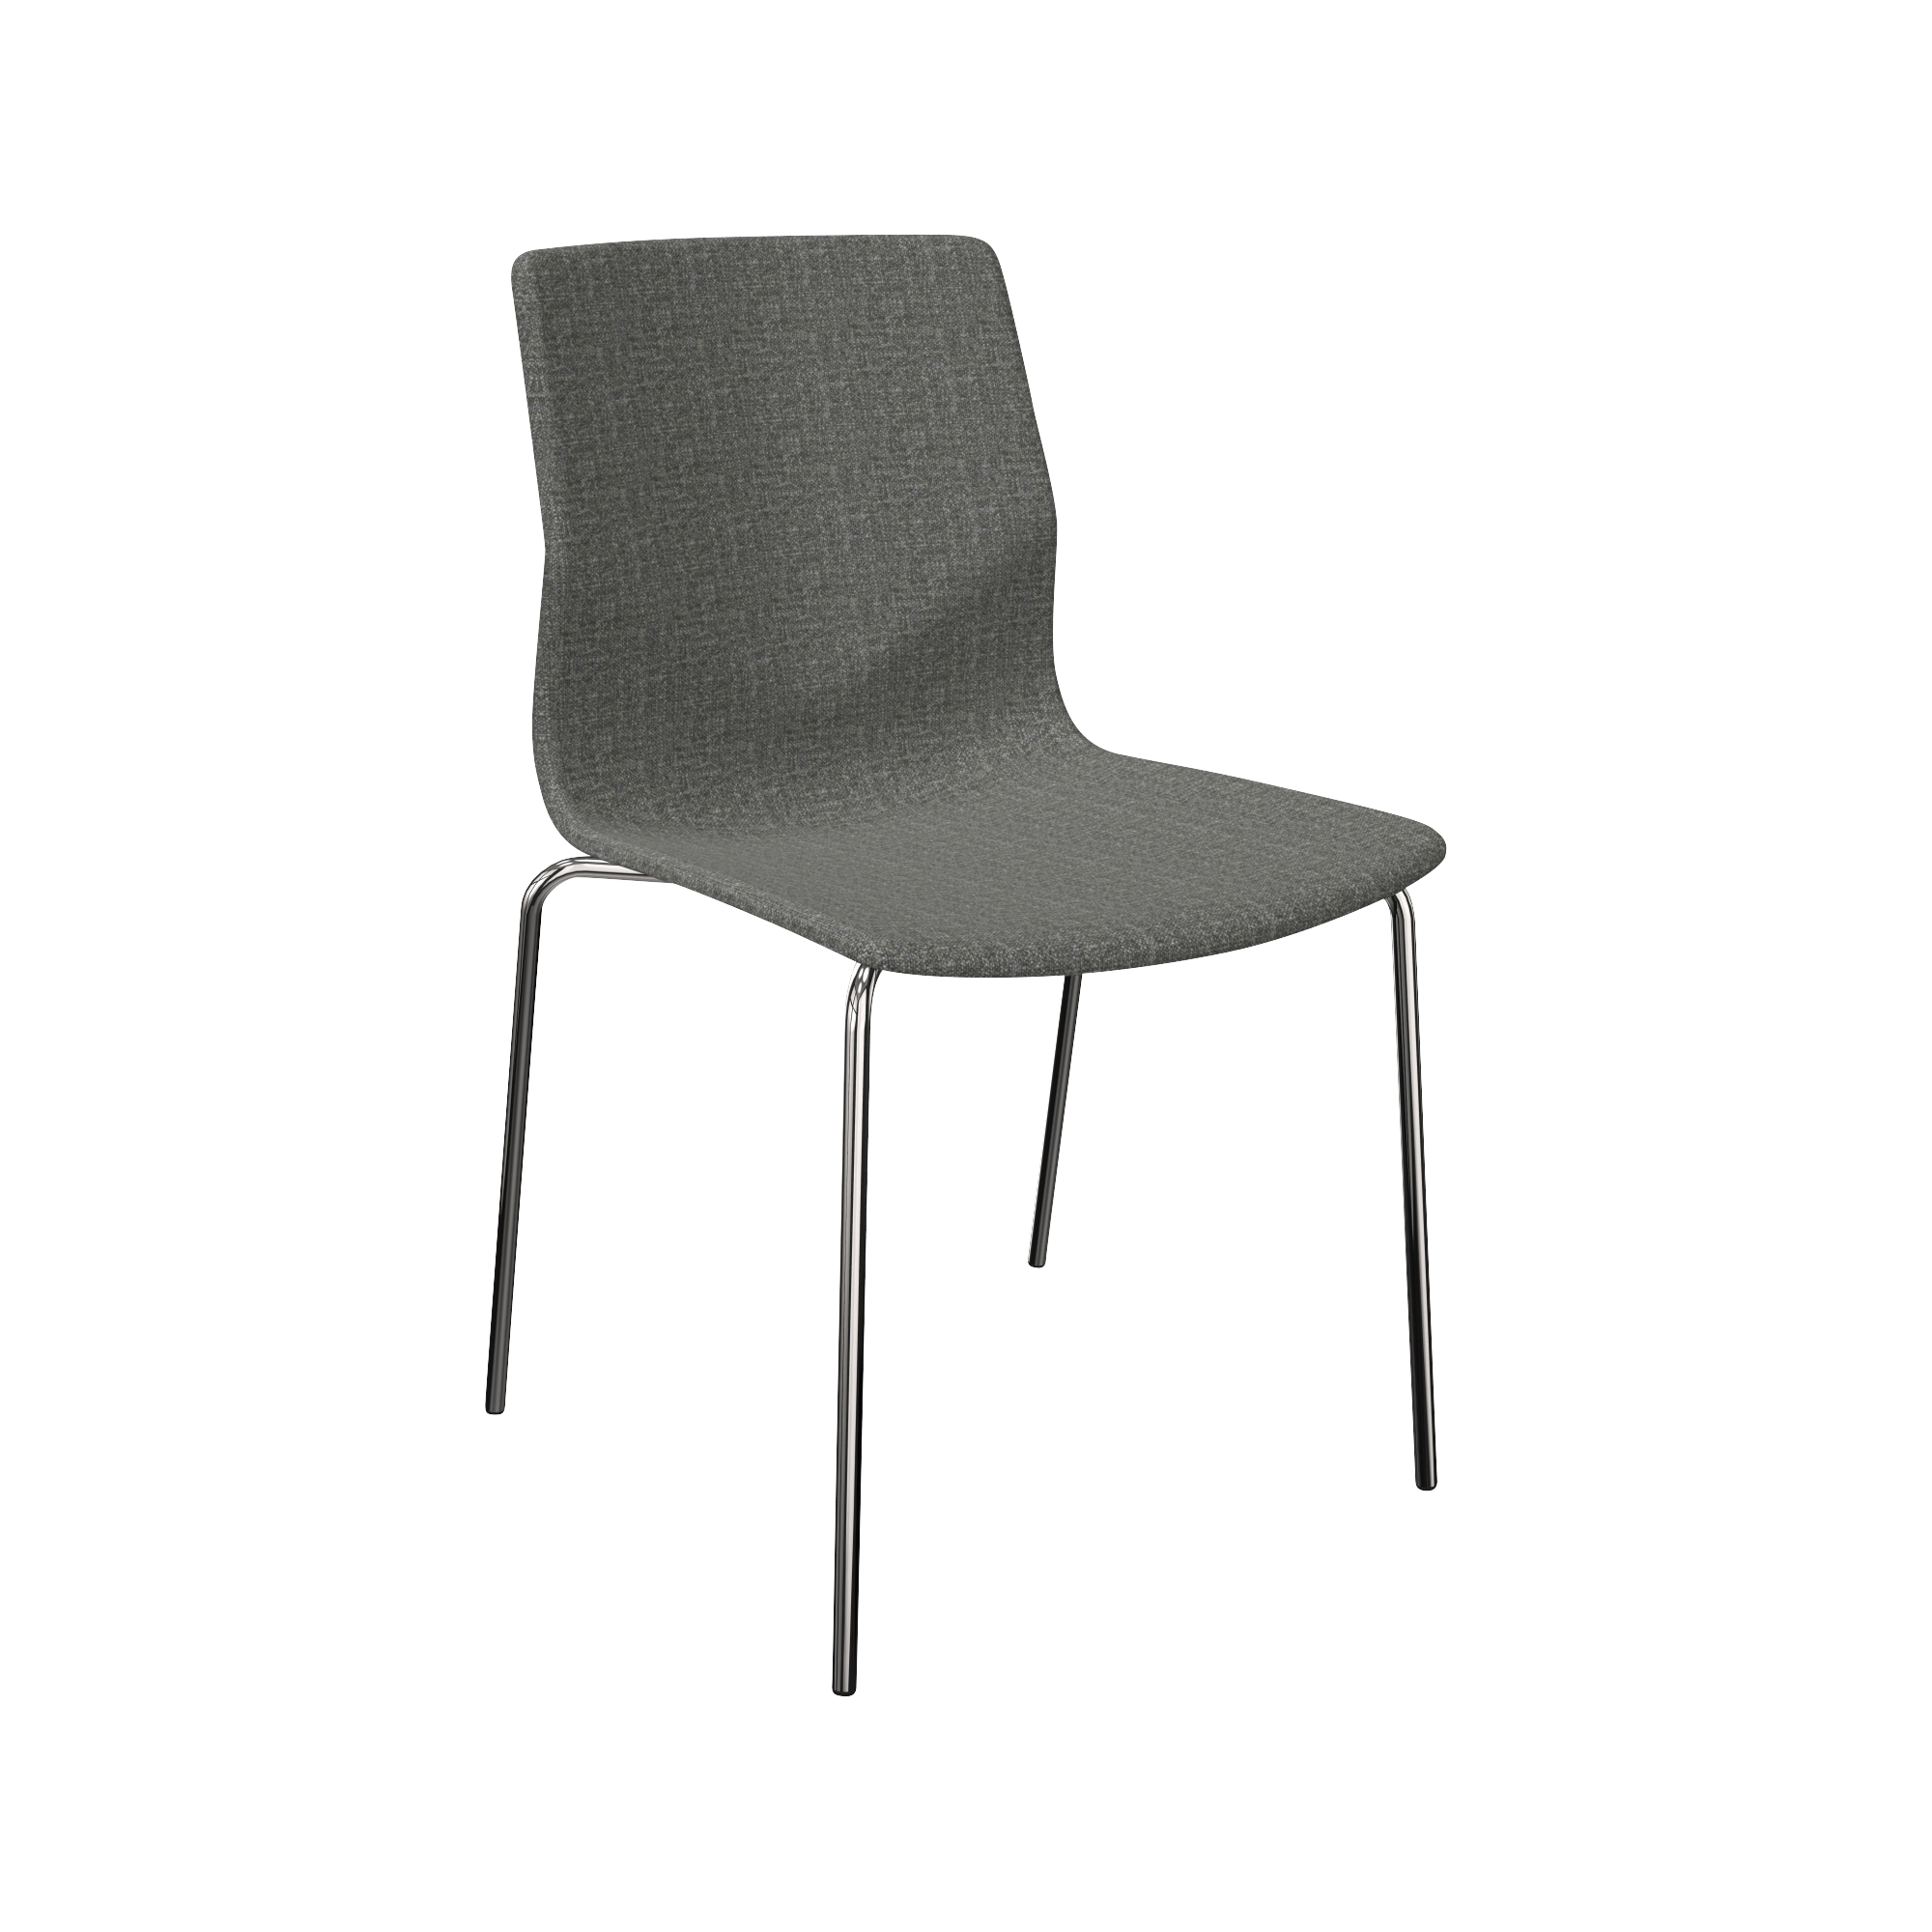 A grey upholstered chair